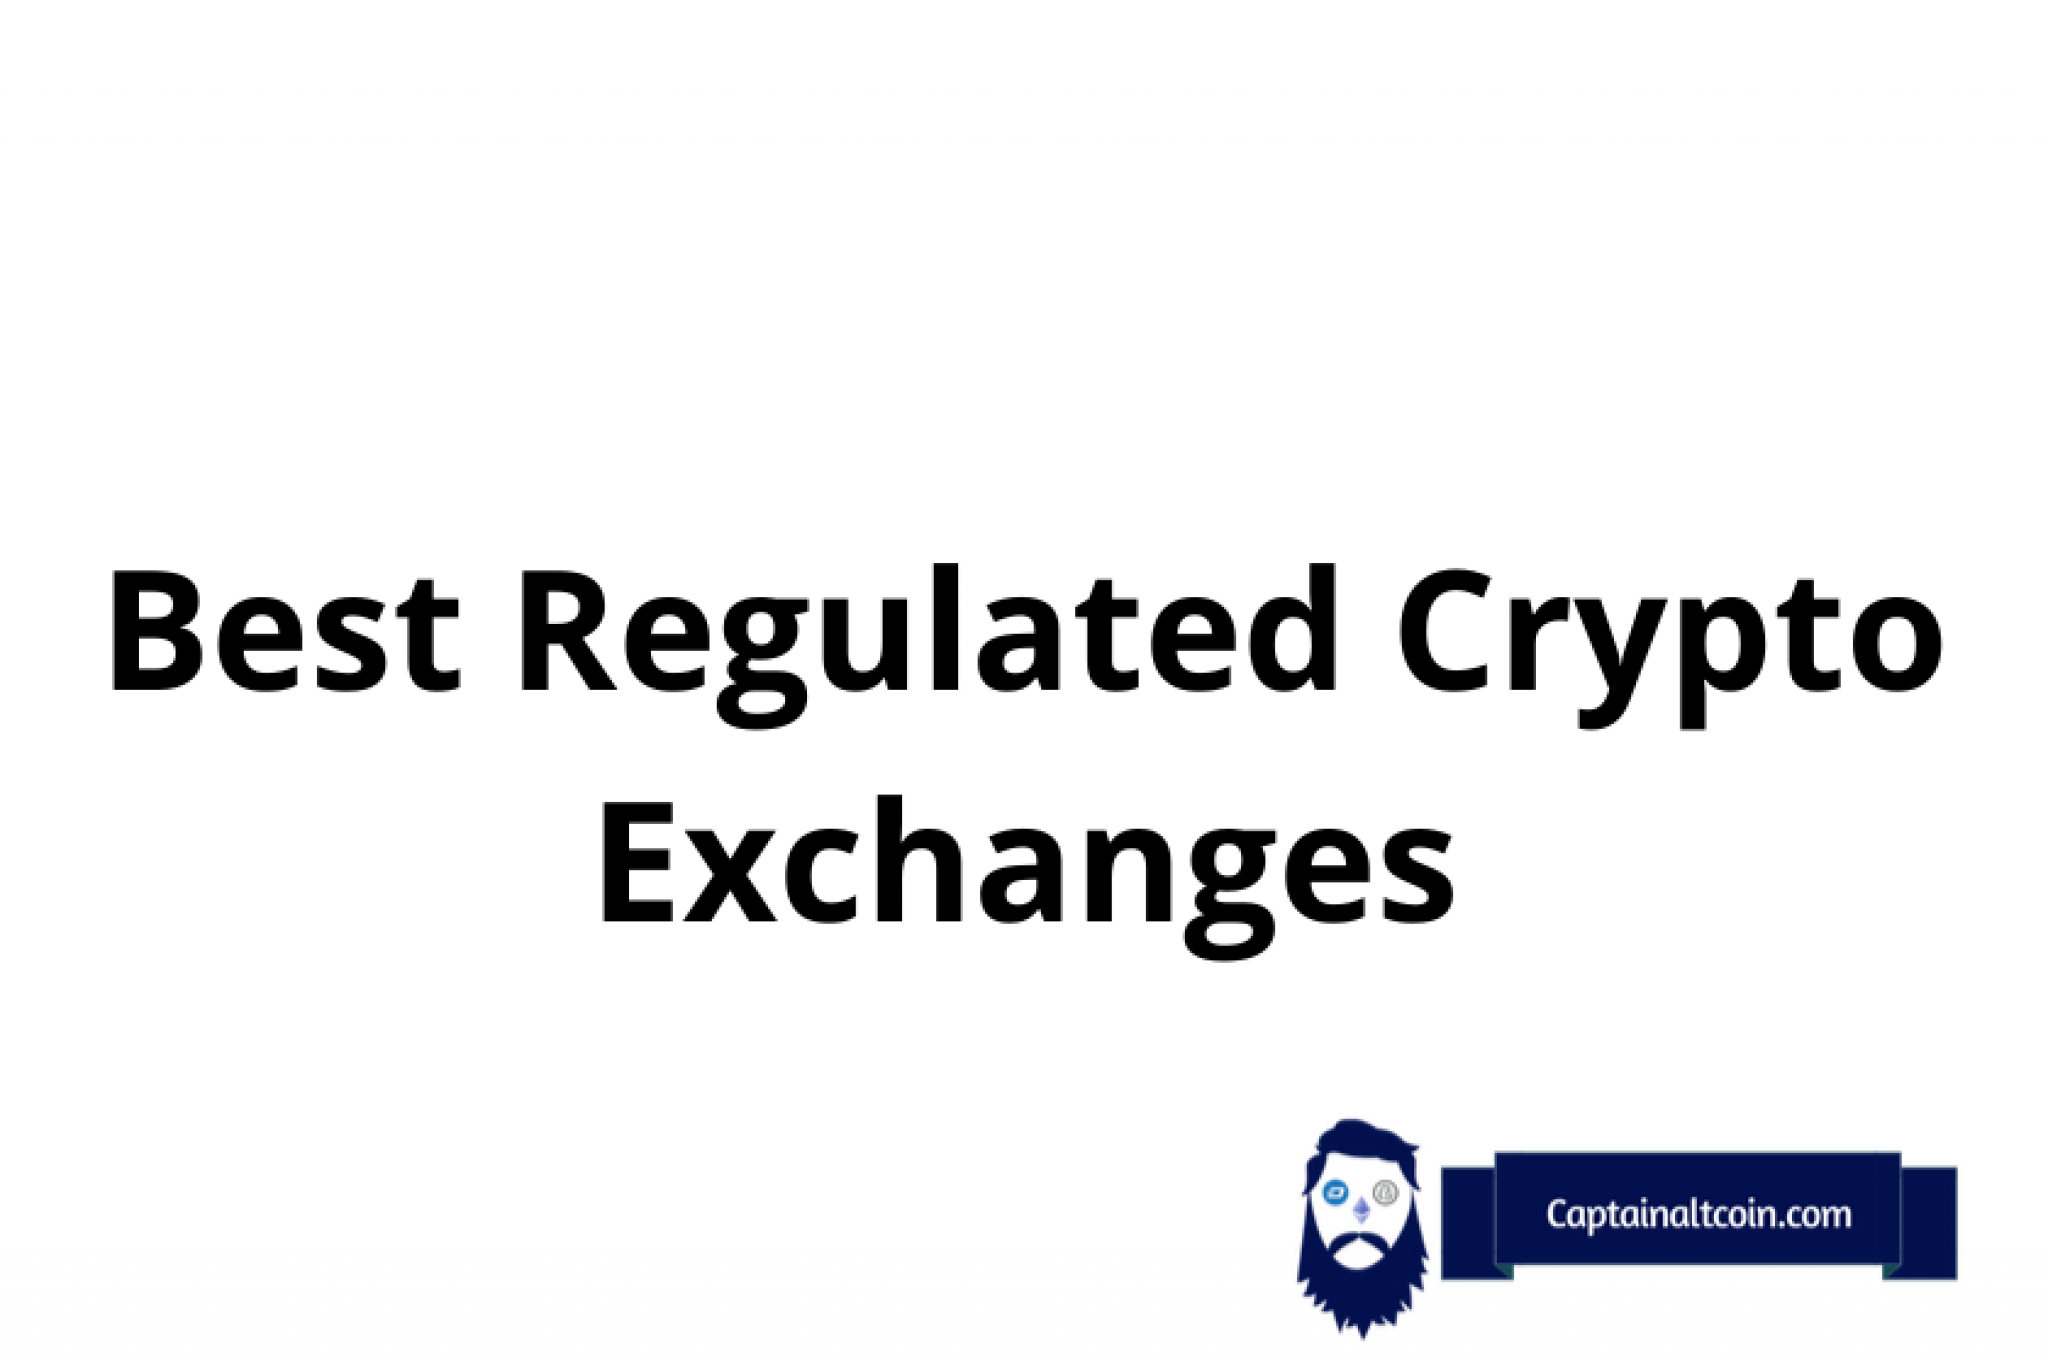 Regulated crypto exchanges